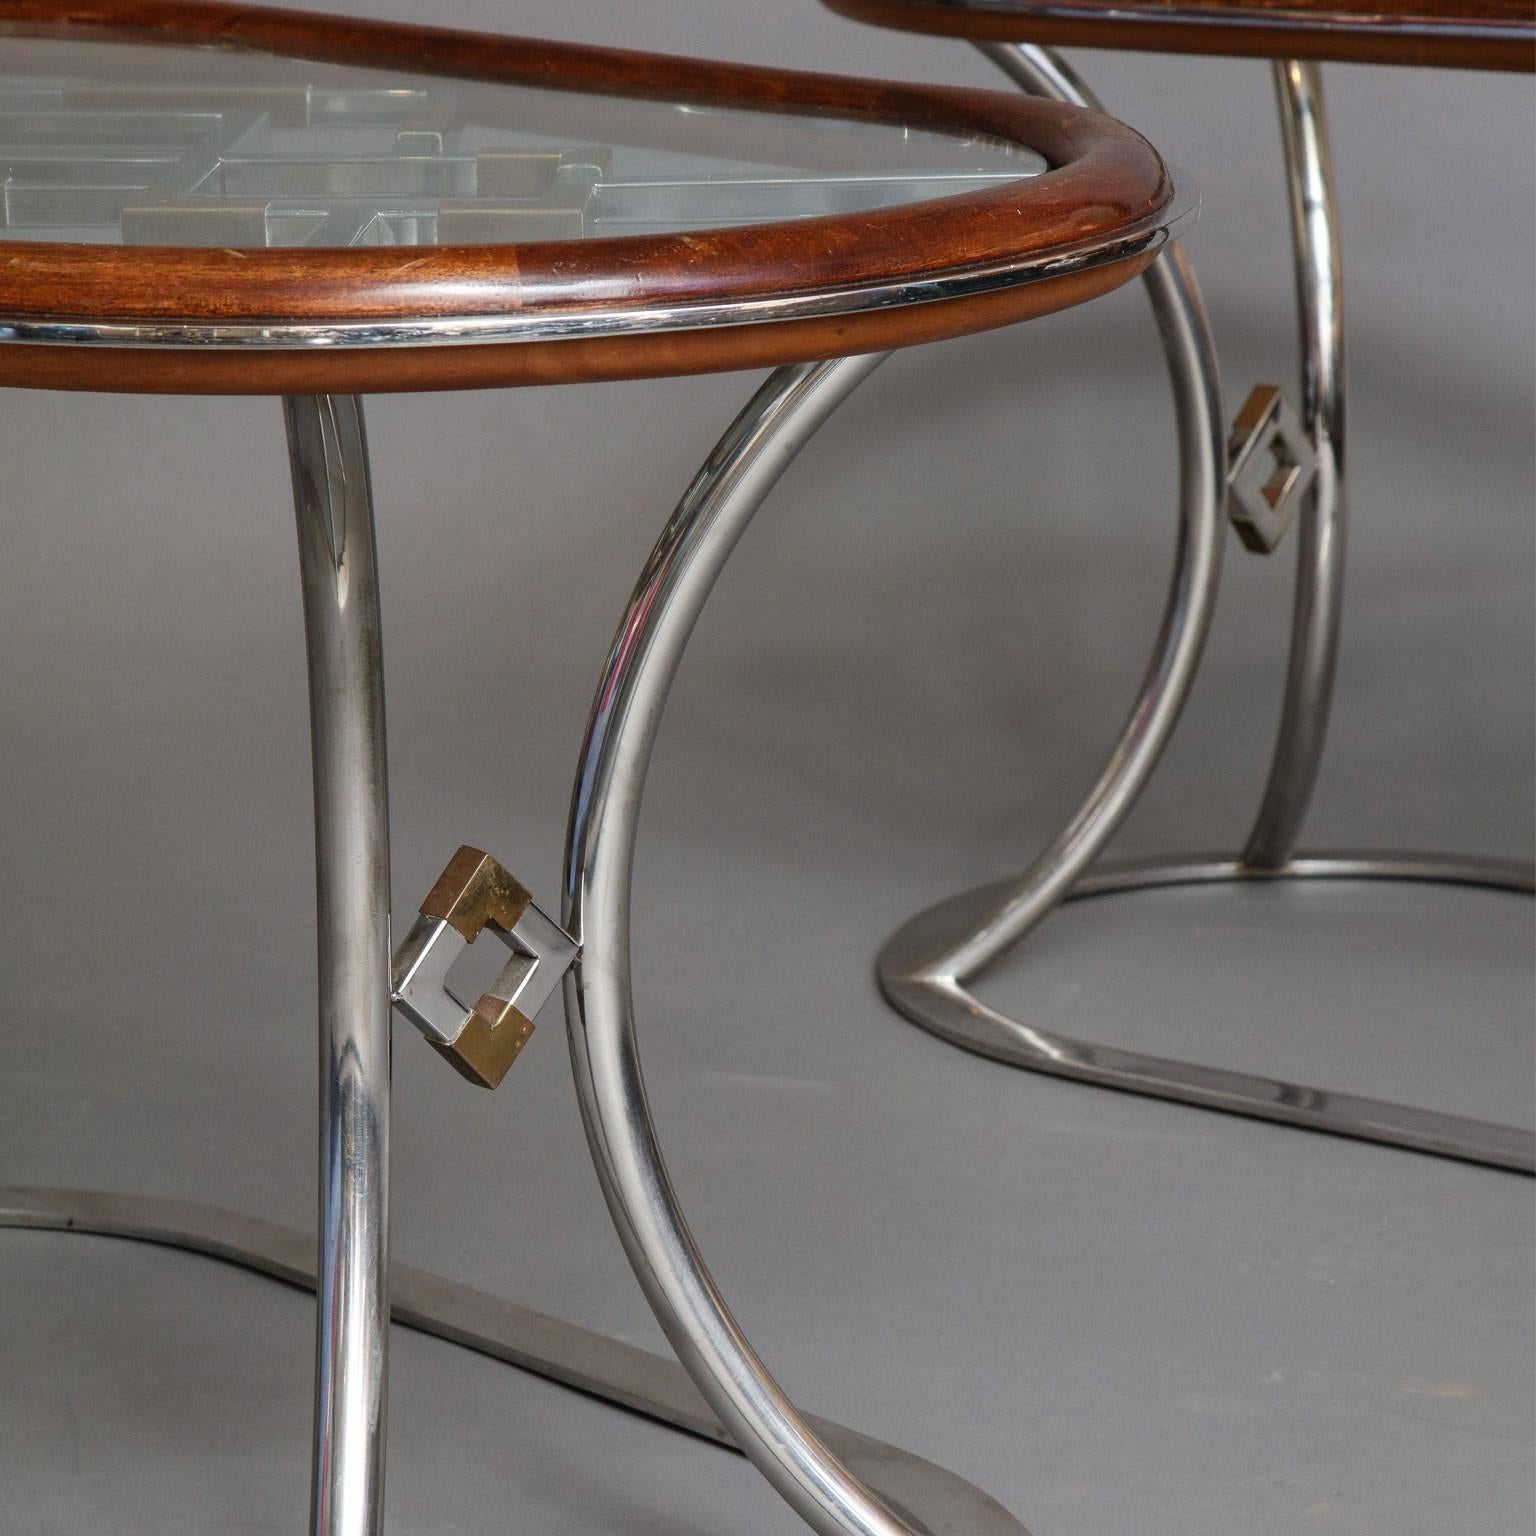 Alain Delon for Maison Jansen
Mixed metal oval side tables in chromed steel with patinated bronze details. Glass top surrounded by bull nose mahogany trim resting on geometric lovers knot base.
French, circa 1970.
 